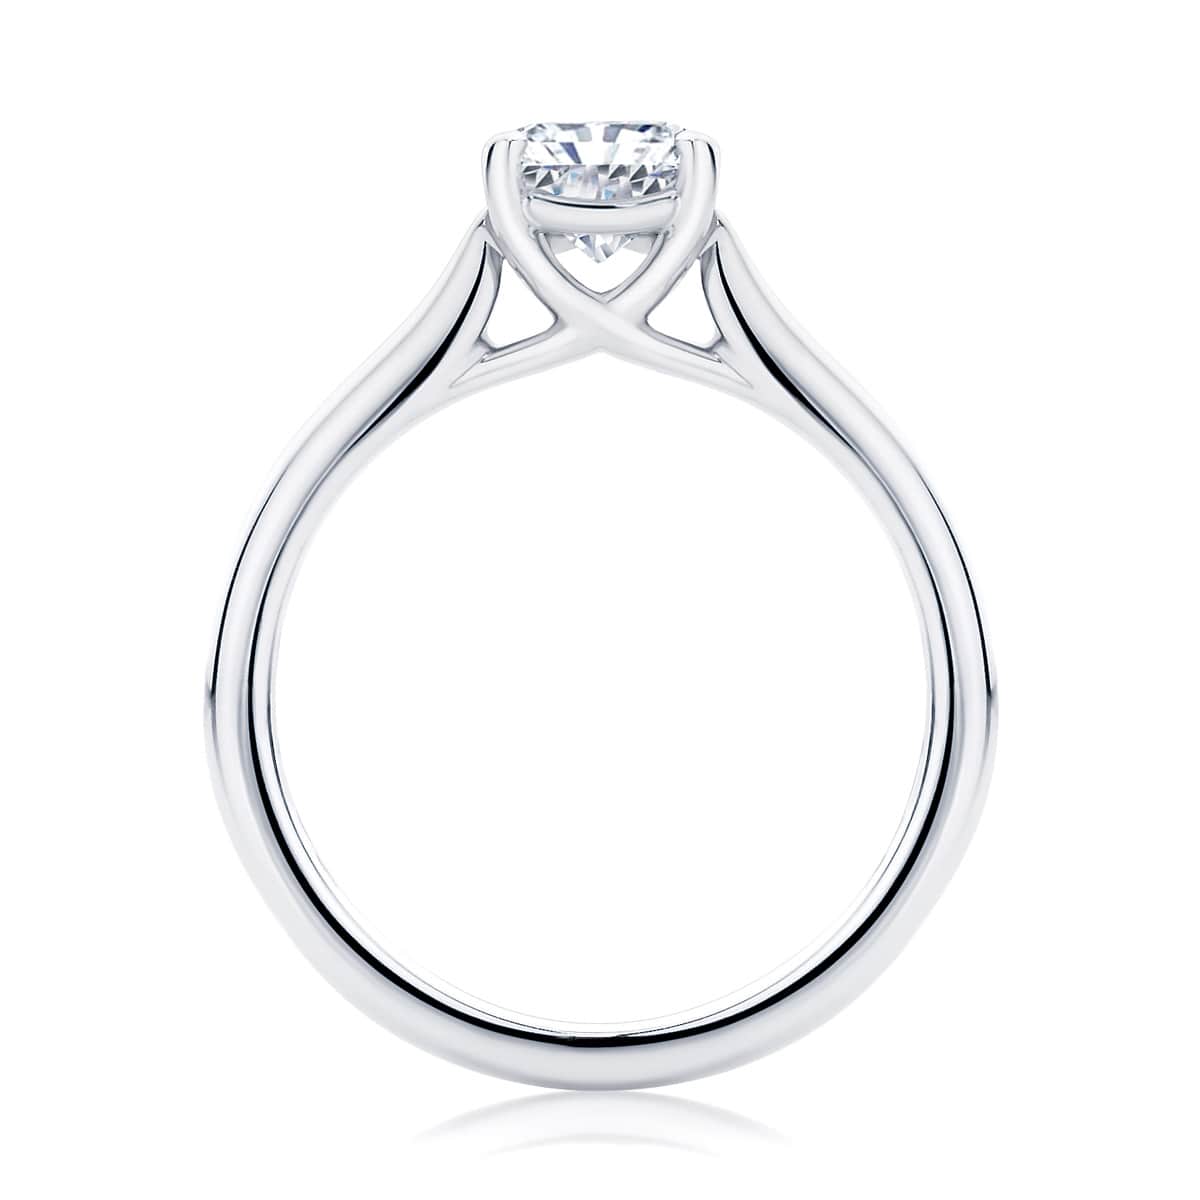 Radiant Diamond Solitaire Ring in White Gold | Ballerina (Radiant Cut)